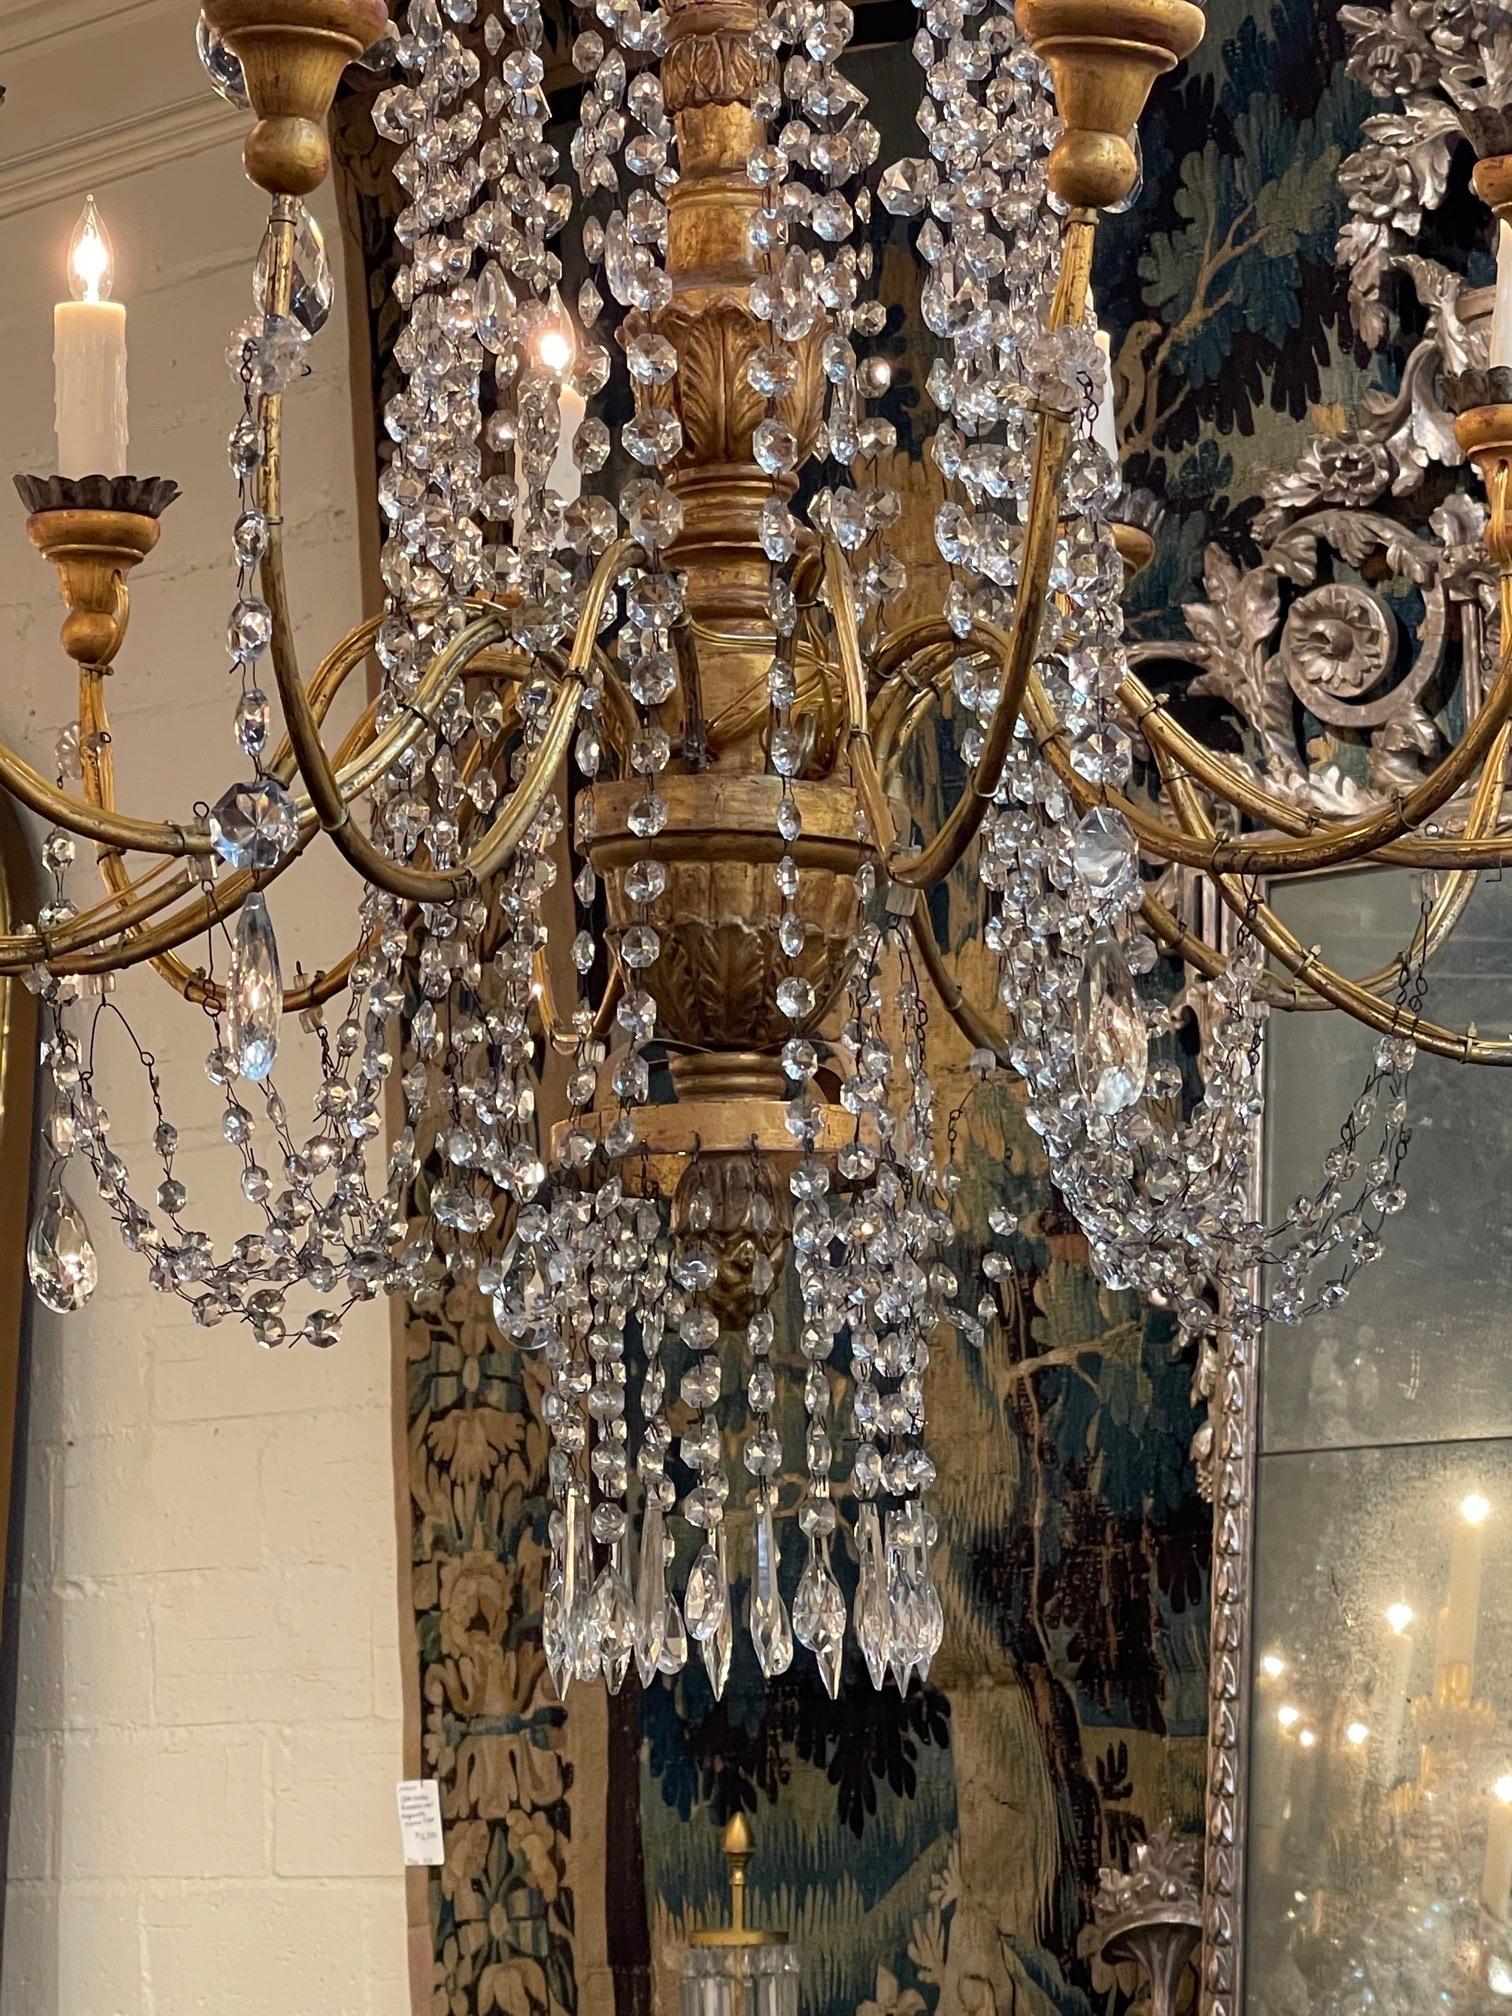 Exquisite large 18th century Italian giltwood beaded and crystal chandelier with 12 lights. The base is beautifully carved and is covered with gorgeous beads and crystals. Great scale and shape to this amazing fixture as well. Stunning!